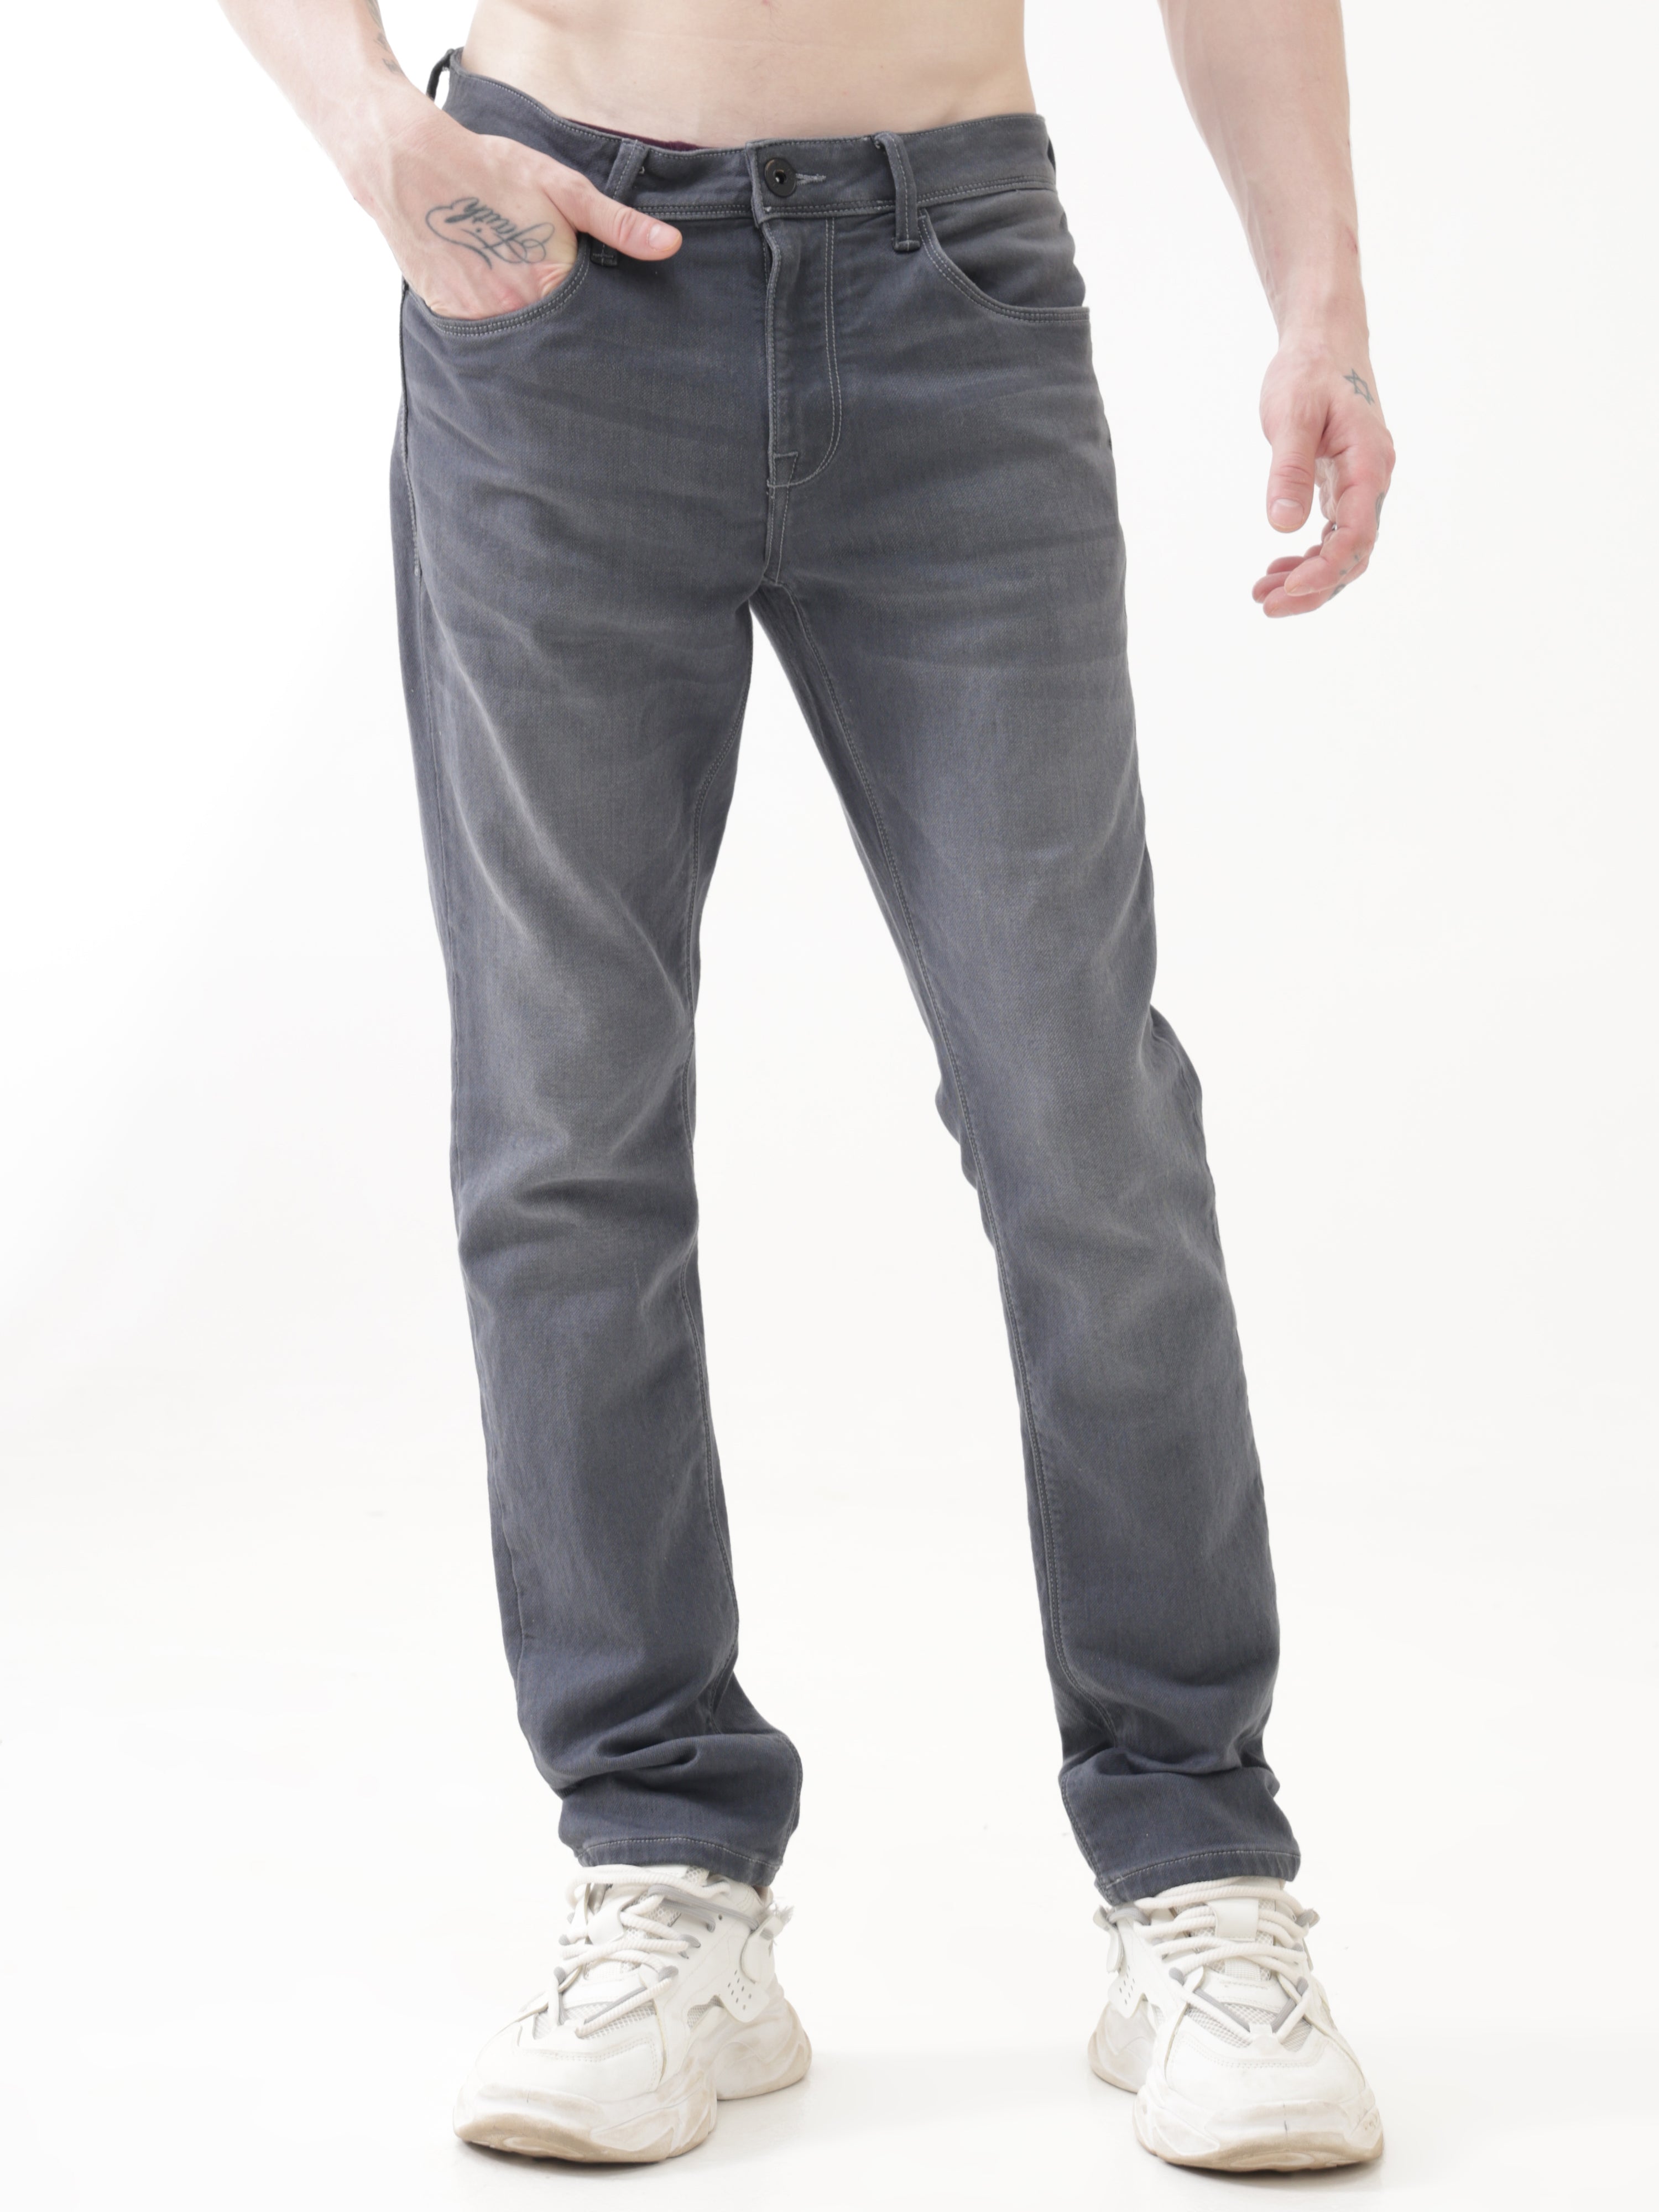 URturms Discover X-plorer 30 days no wash jeans for men by Turms. Anti-stain, anti-odor, tailored fit jeans perfect for everyday and travel wear. Rs. 2999.00